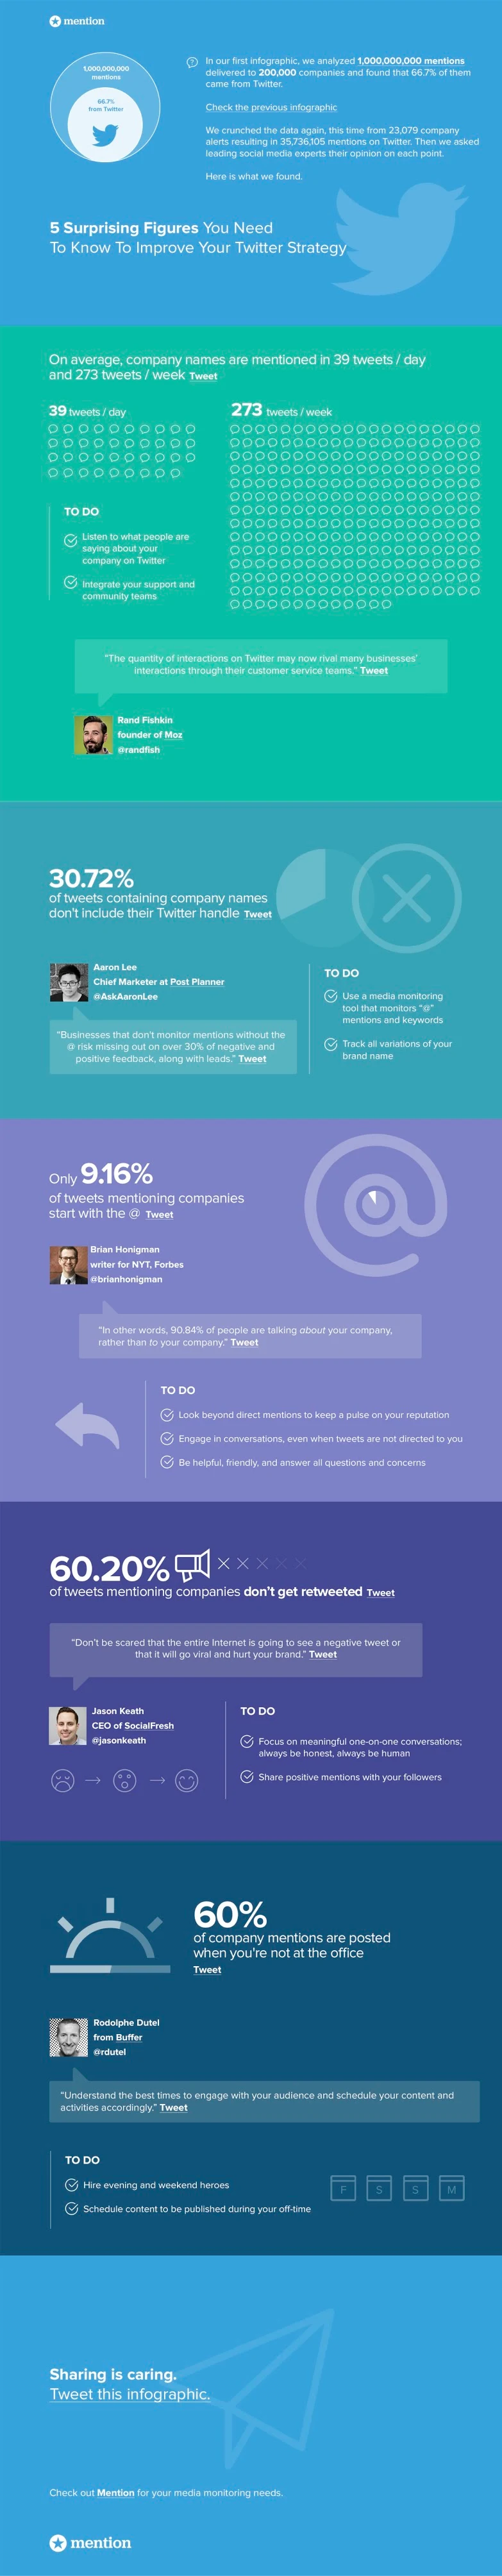 Improve Your Twitter Strategy With These 5 Surprising Figures - infographic